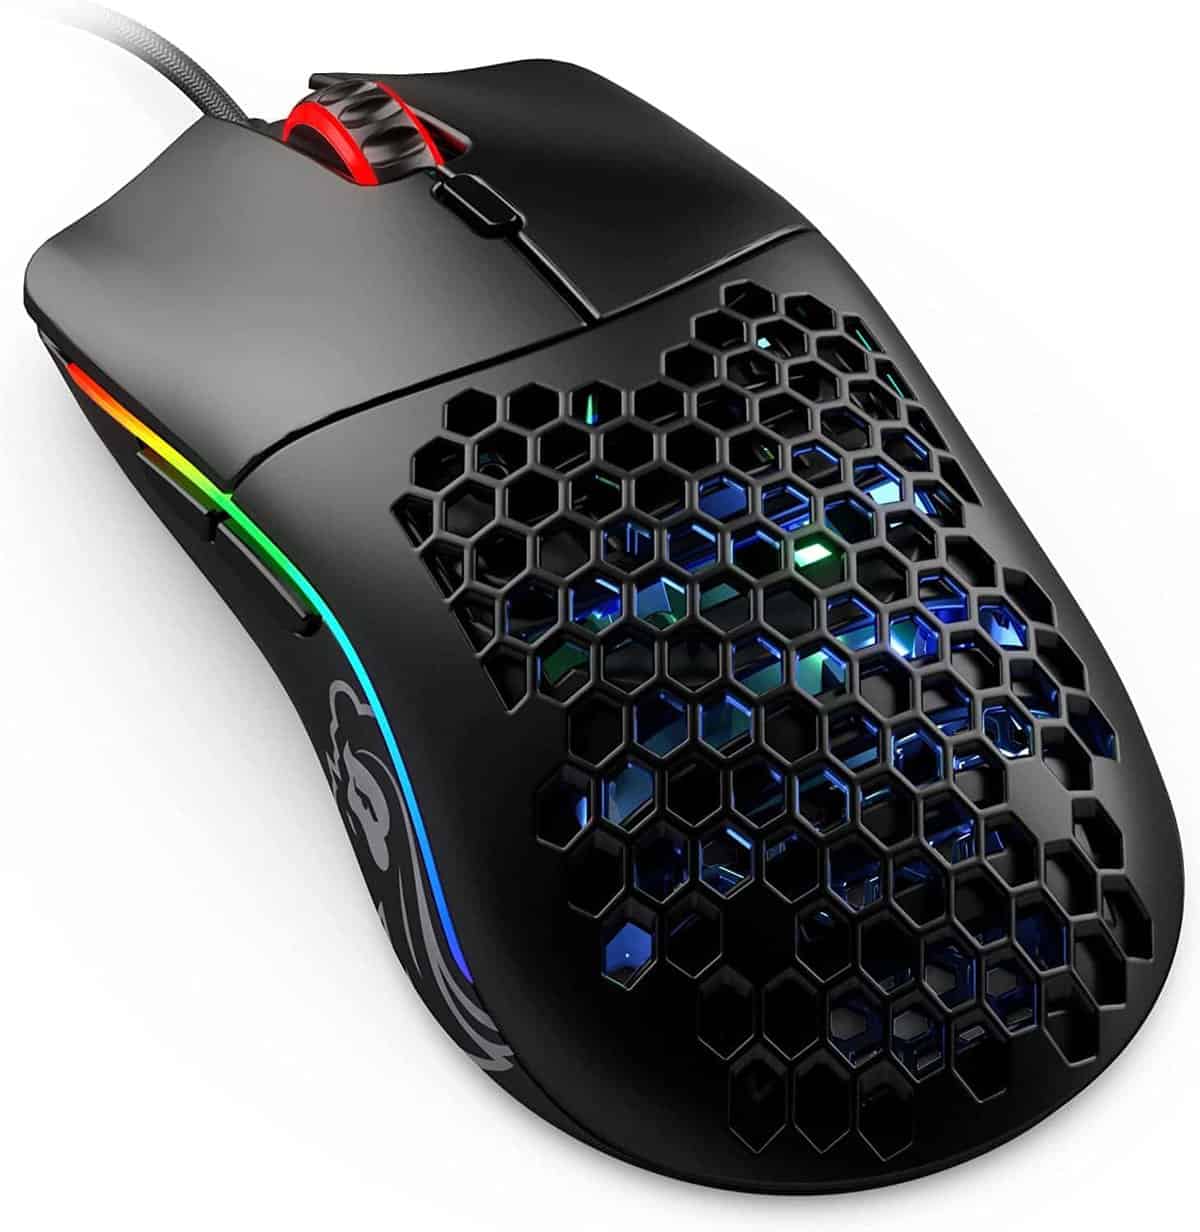 Best lightweight drag clicking mouse - Glorious Model O